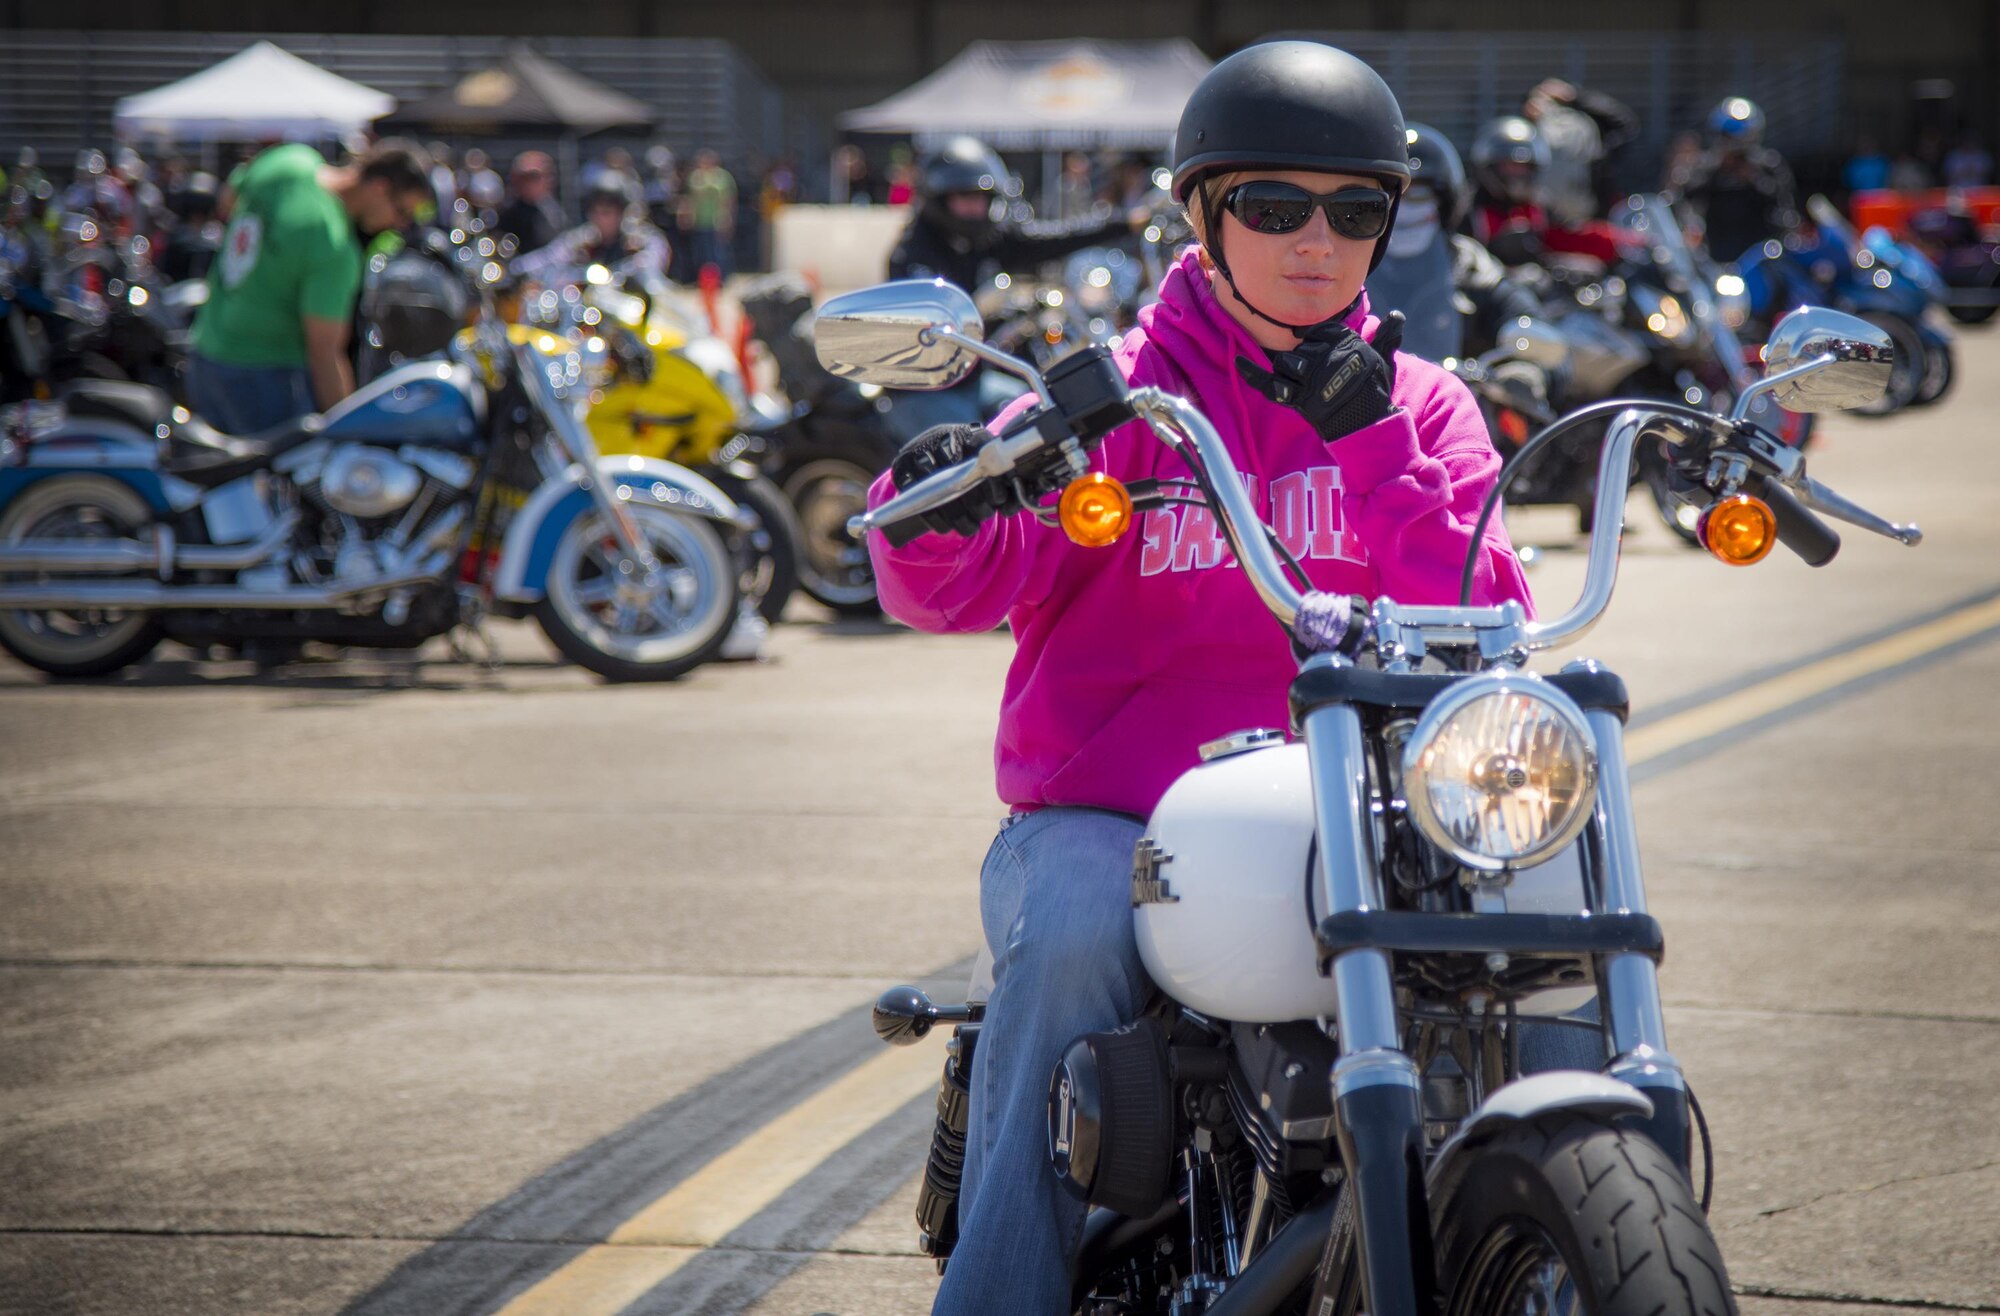 A biker rolls out after the annual motorcycle safety rally at Eglin Air Force Base, Fla., April 14.  More than 500 motorcyclists came out for the event that meets the annual safety briefing requirement for base riders.  (U.S. Air Force photo/Samuel King Jr.)